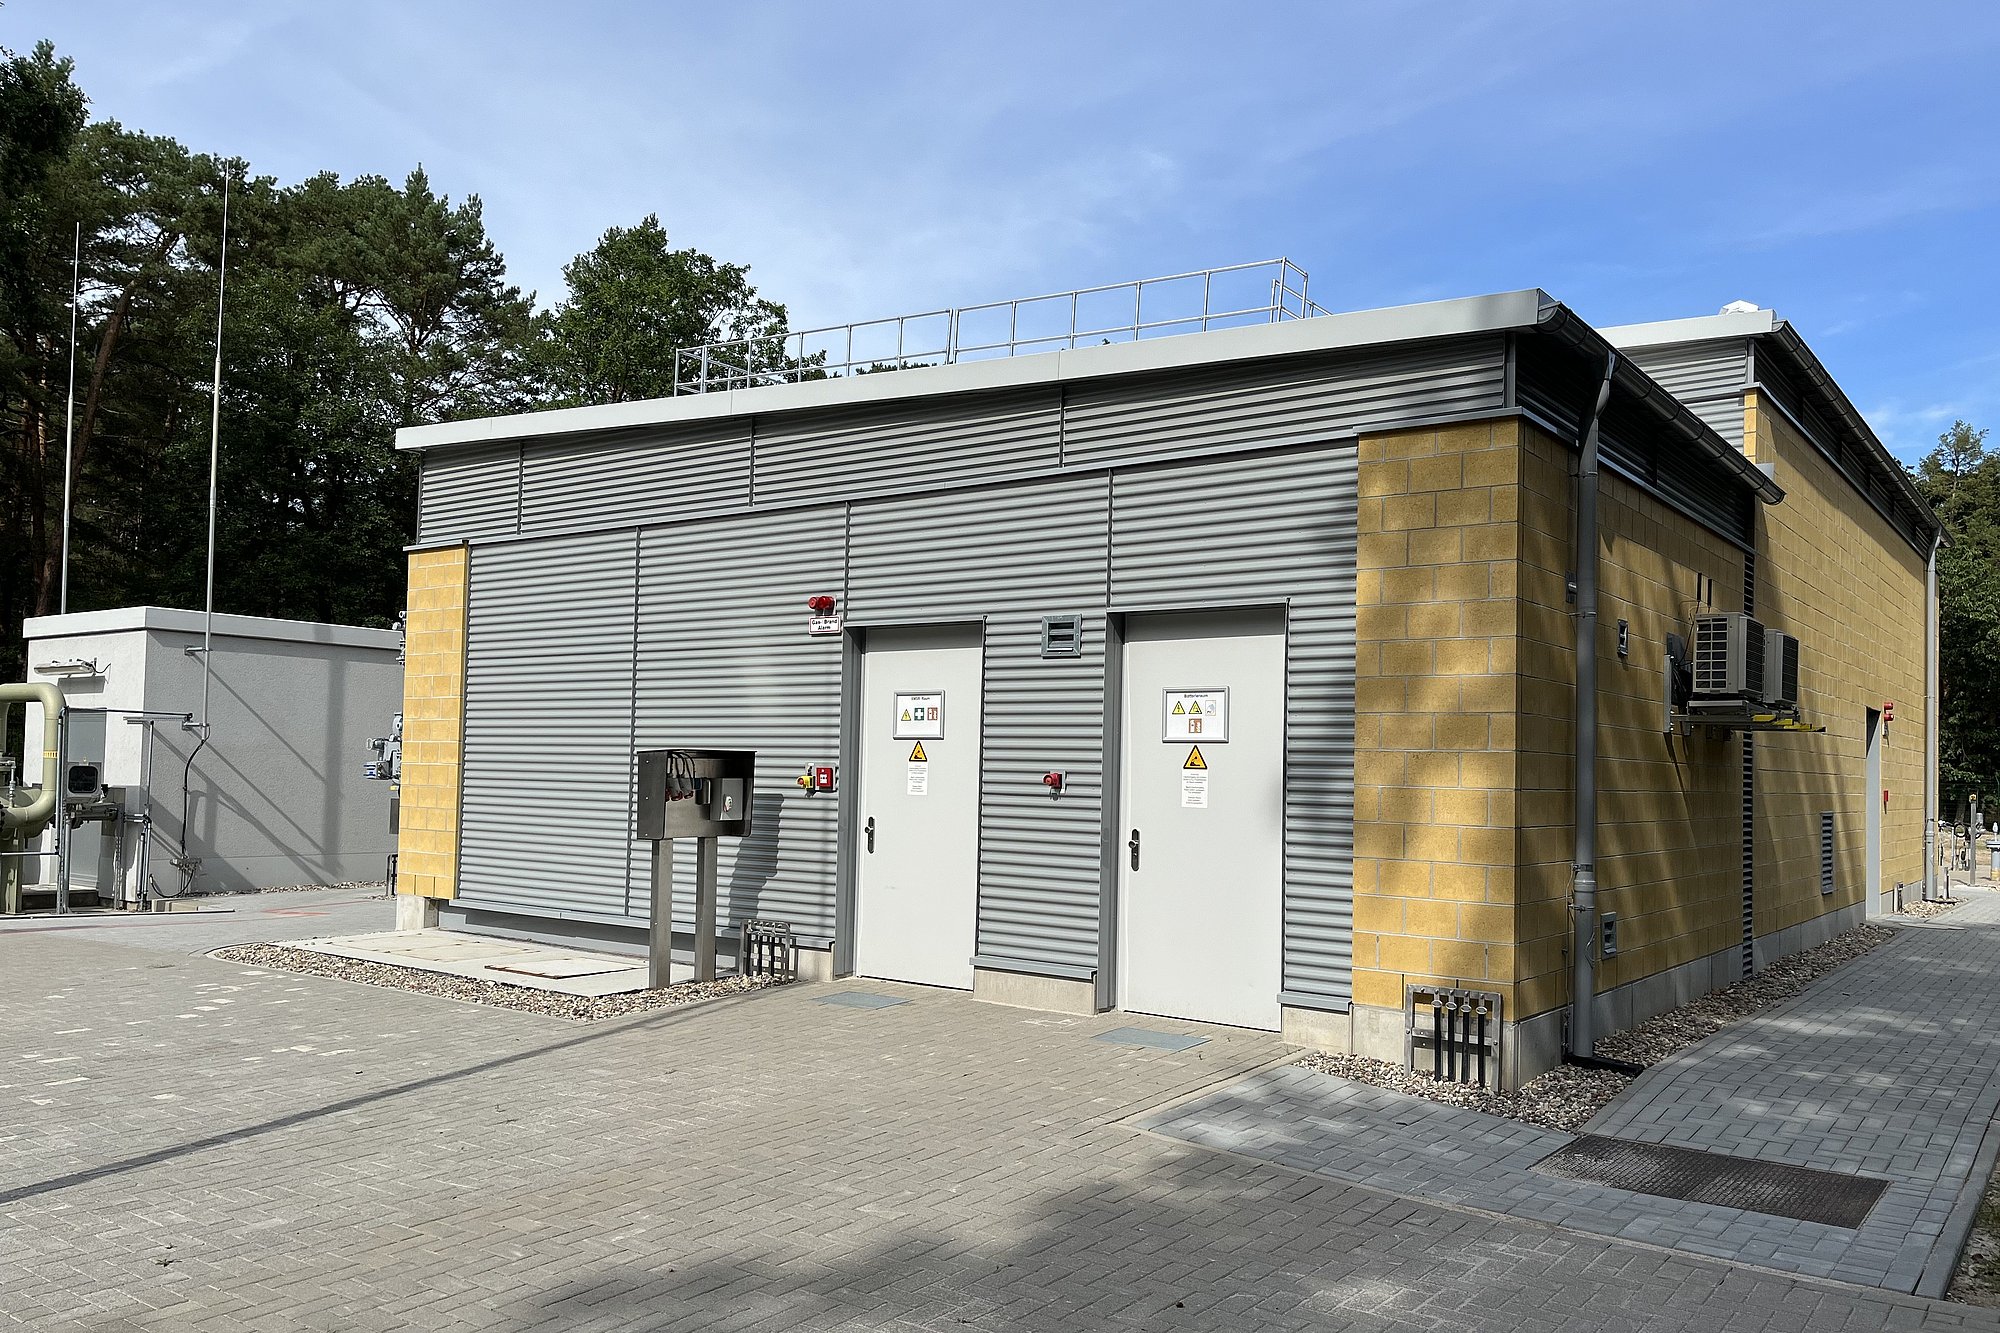 Construction of gas pressure regulating and metering station Nesselgrund (Germany)